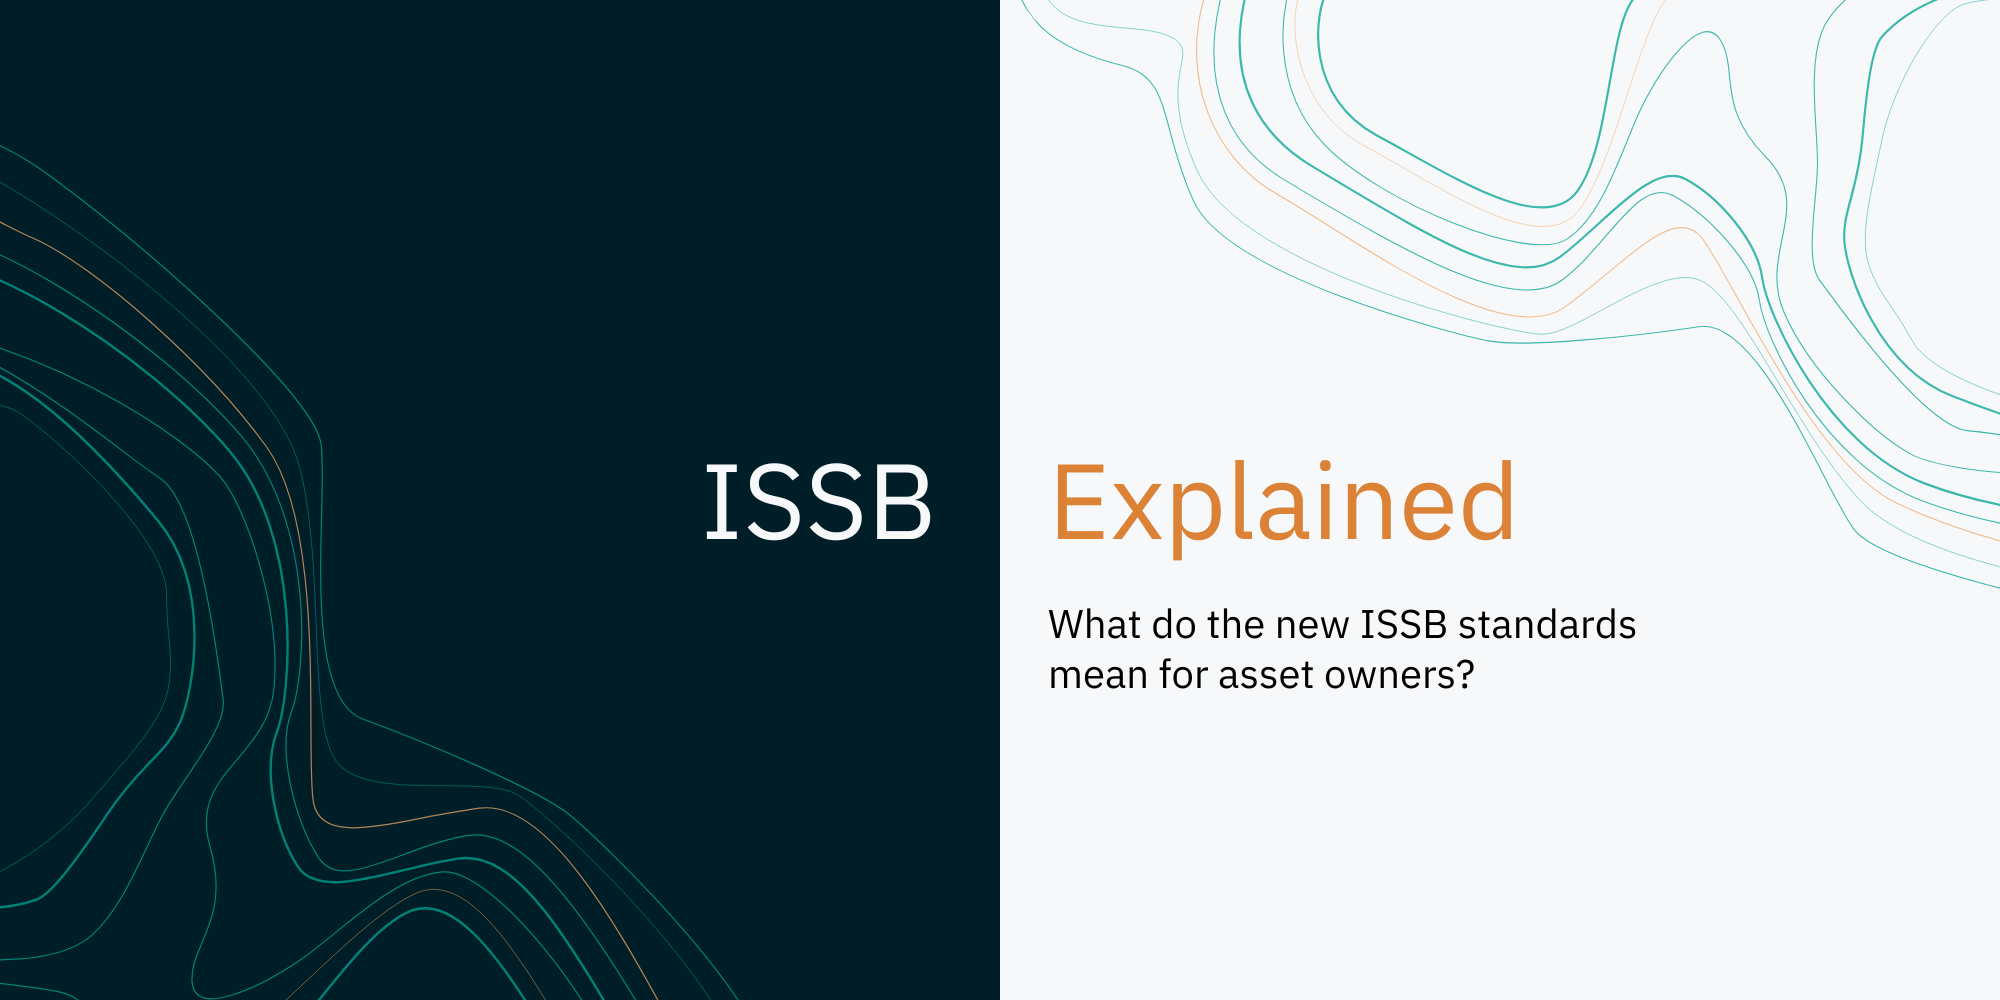 ISSB Explained: What do the new ISSB standards mean for asset owners?